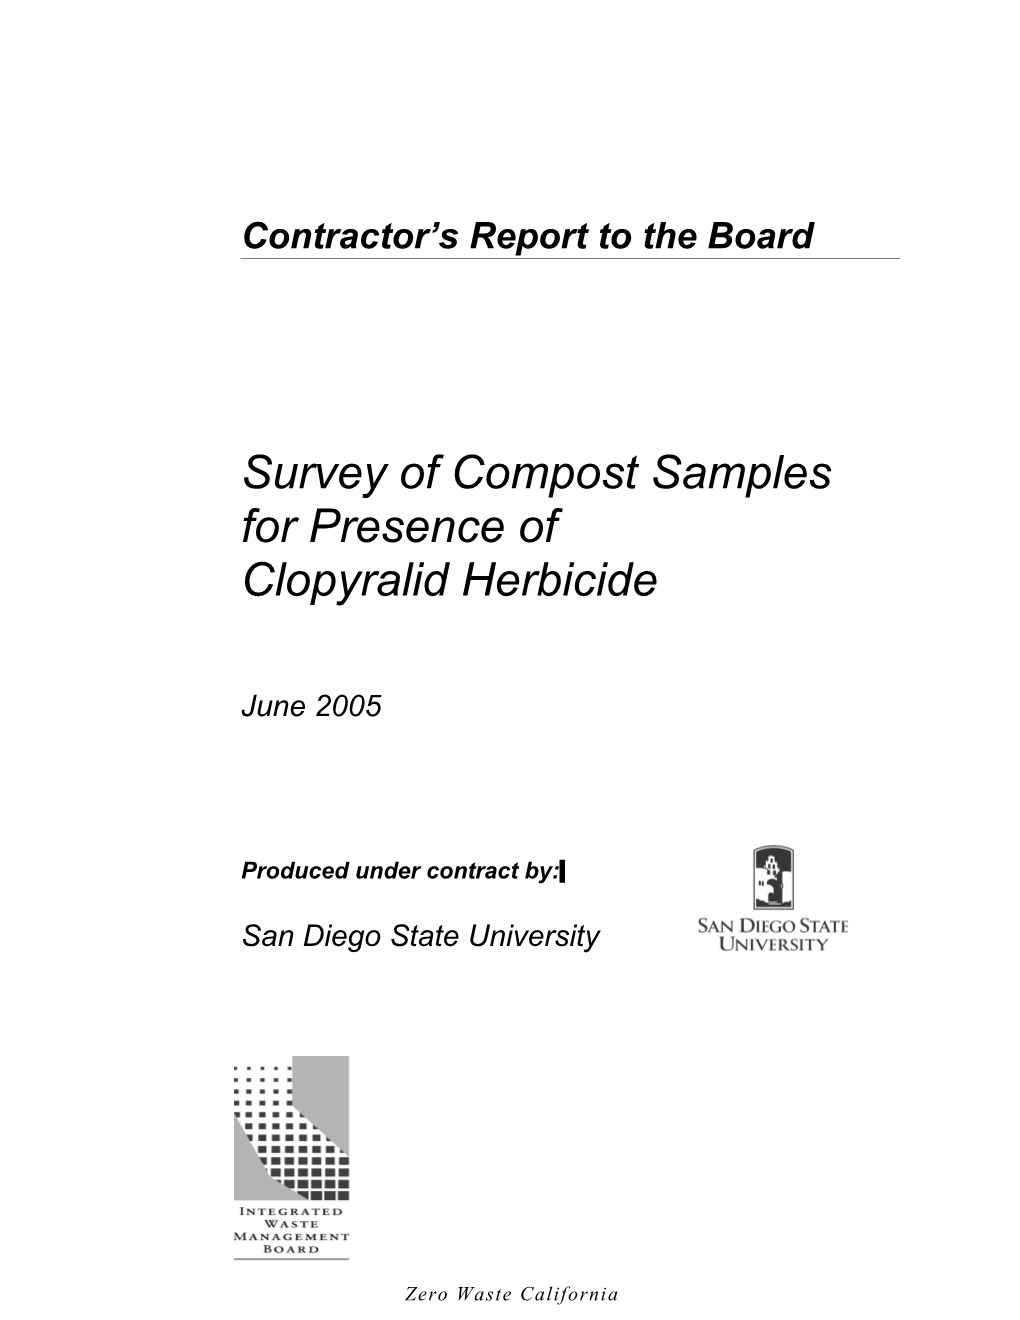 Survey of Compost Samples for Presence of Clopyralid Herbicide: Final Report